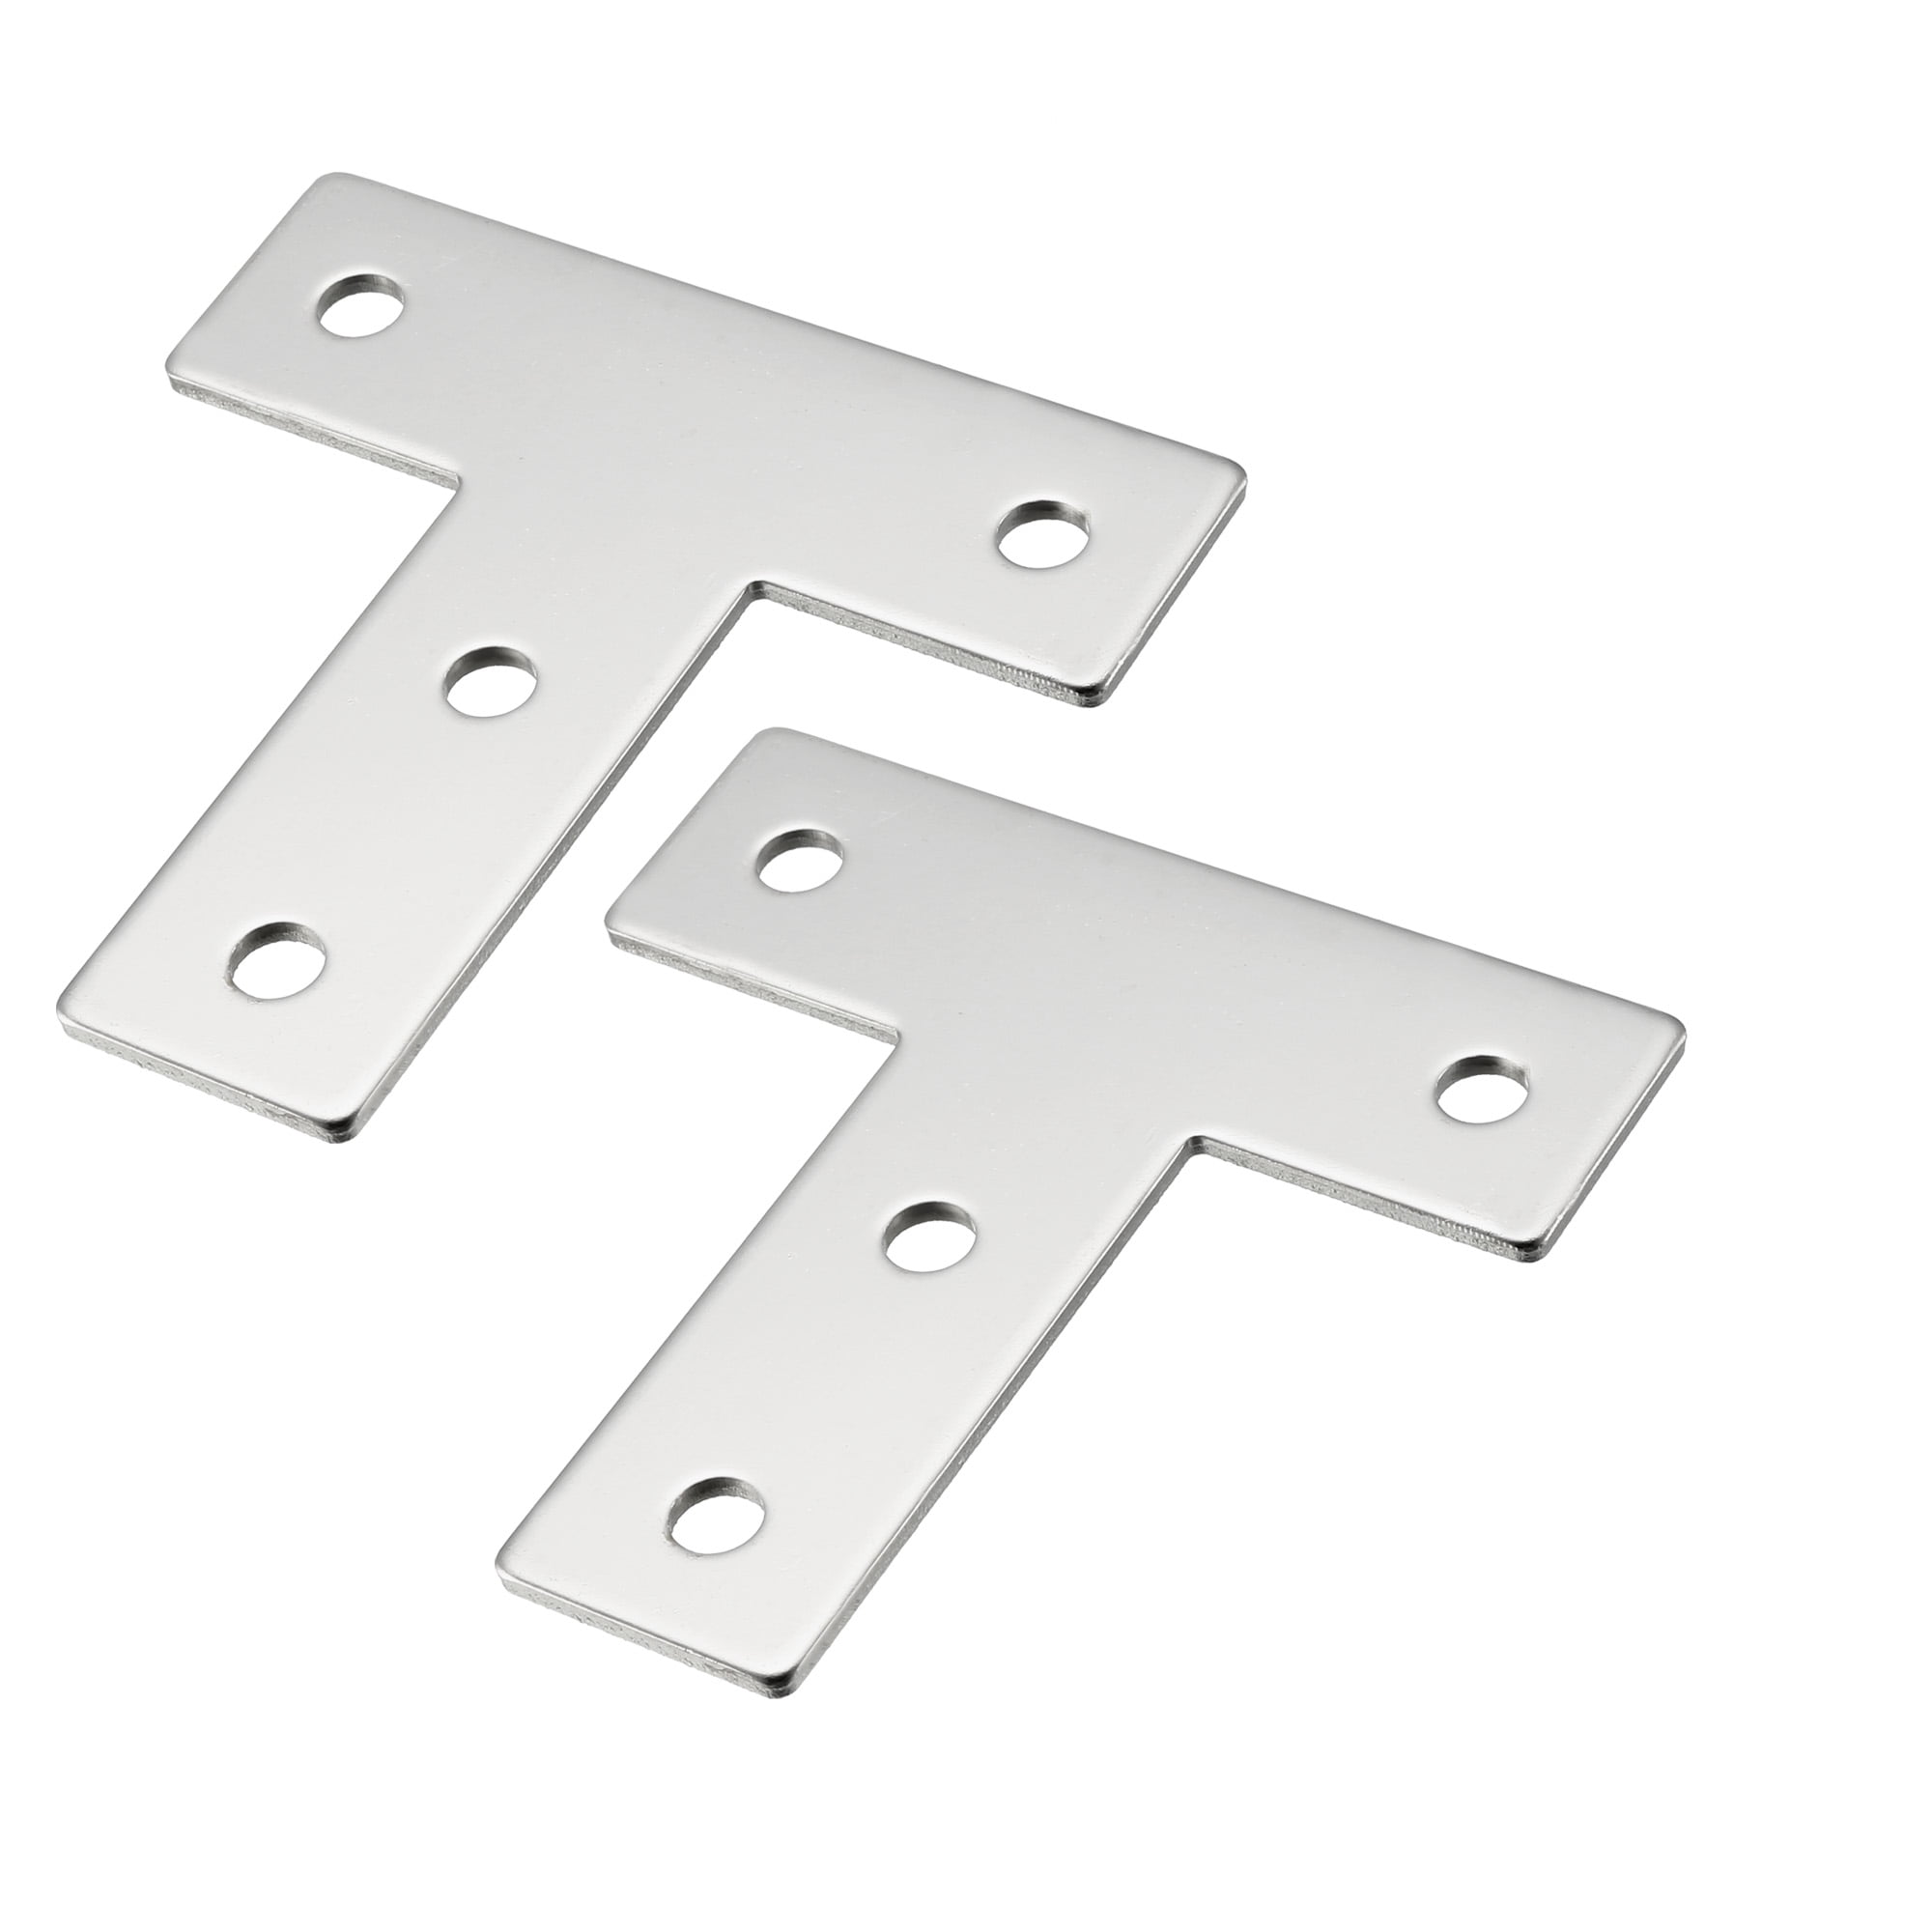 2PCS Stainless Steel Flat Straight Brackets Mending Plates Repair Fixing Joining 